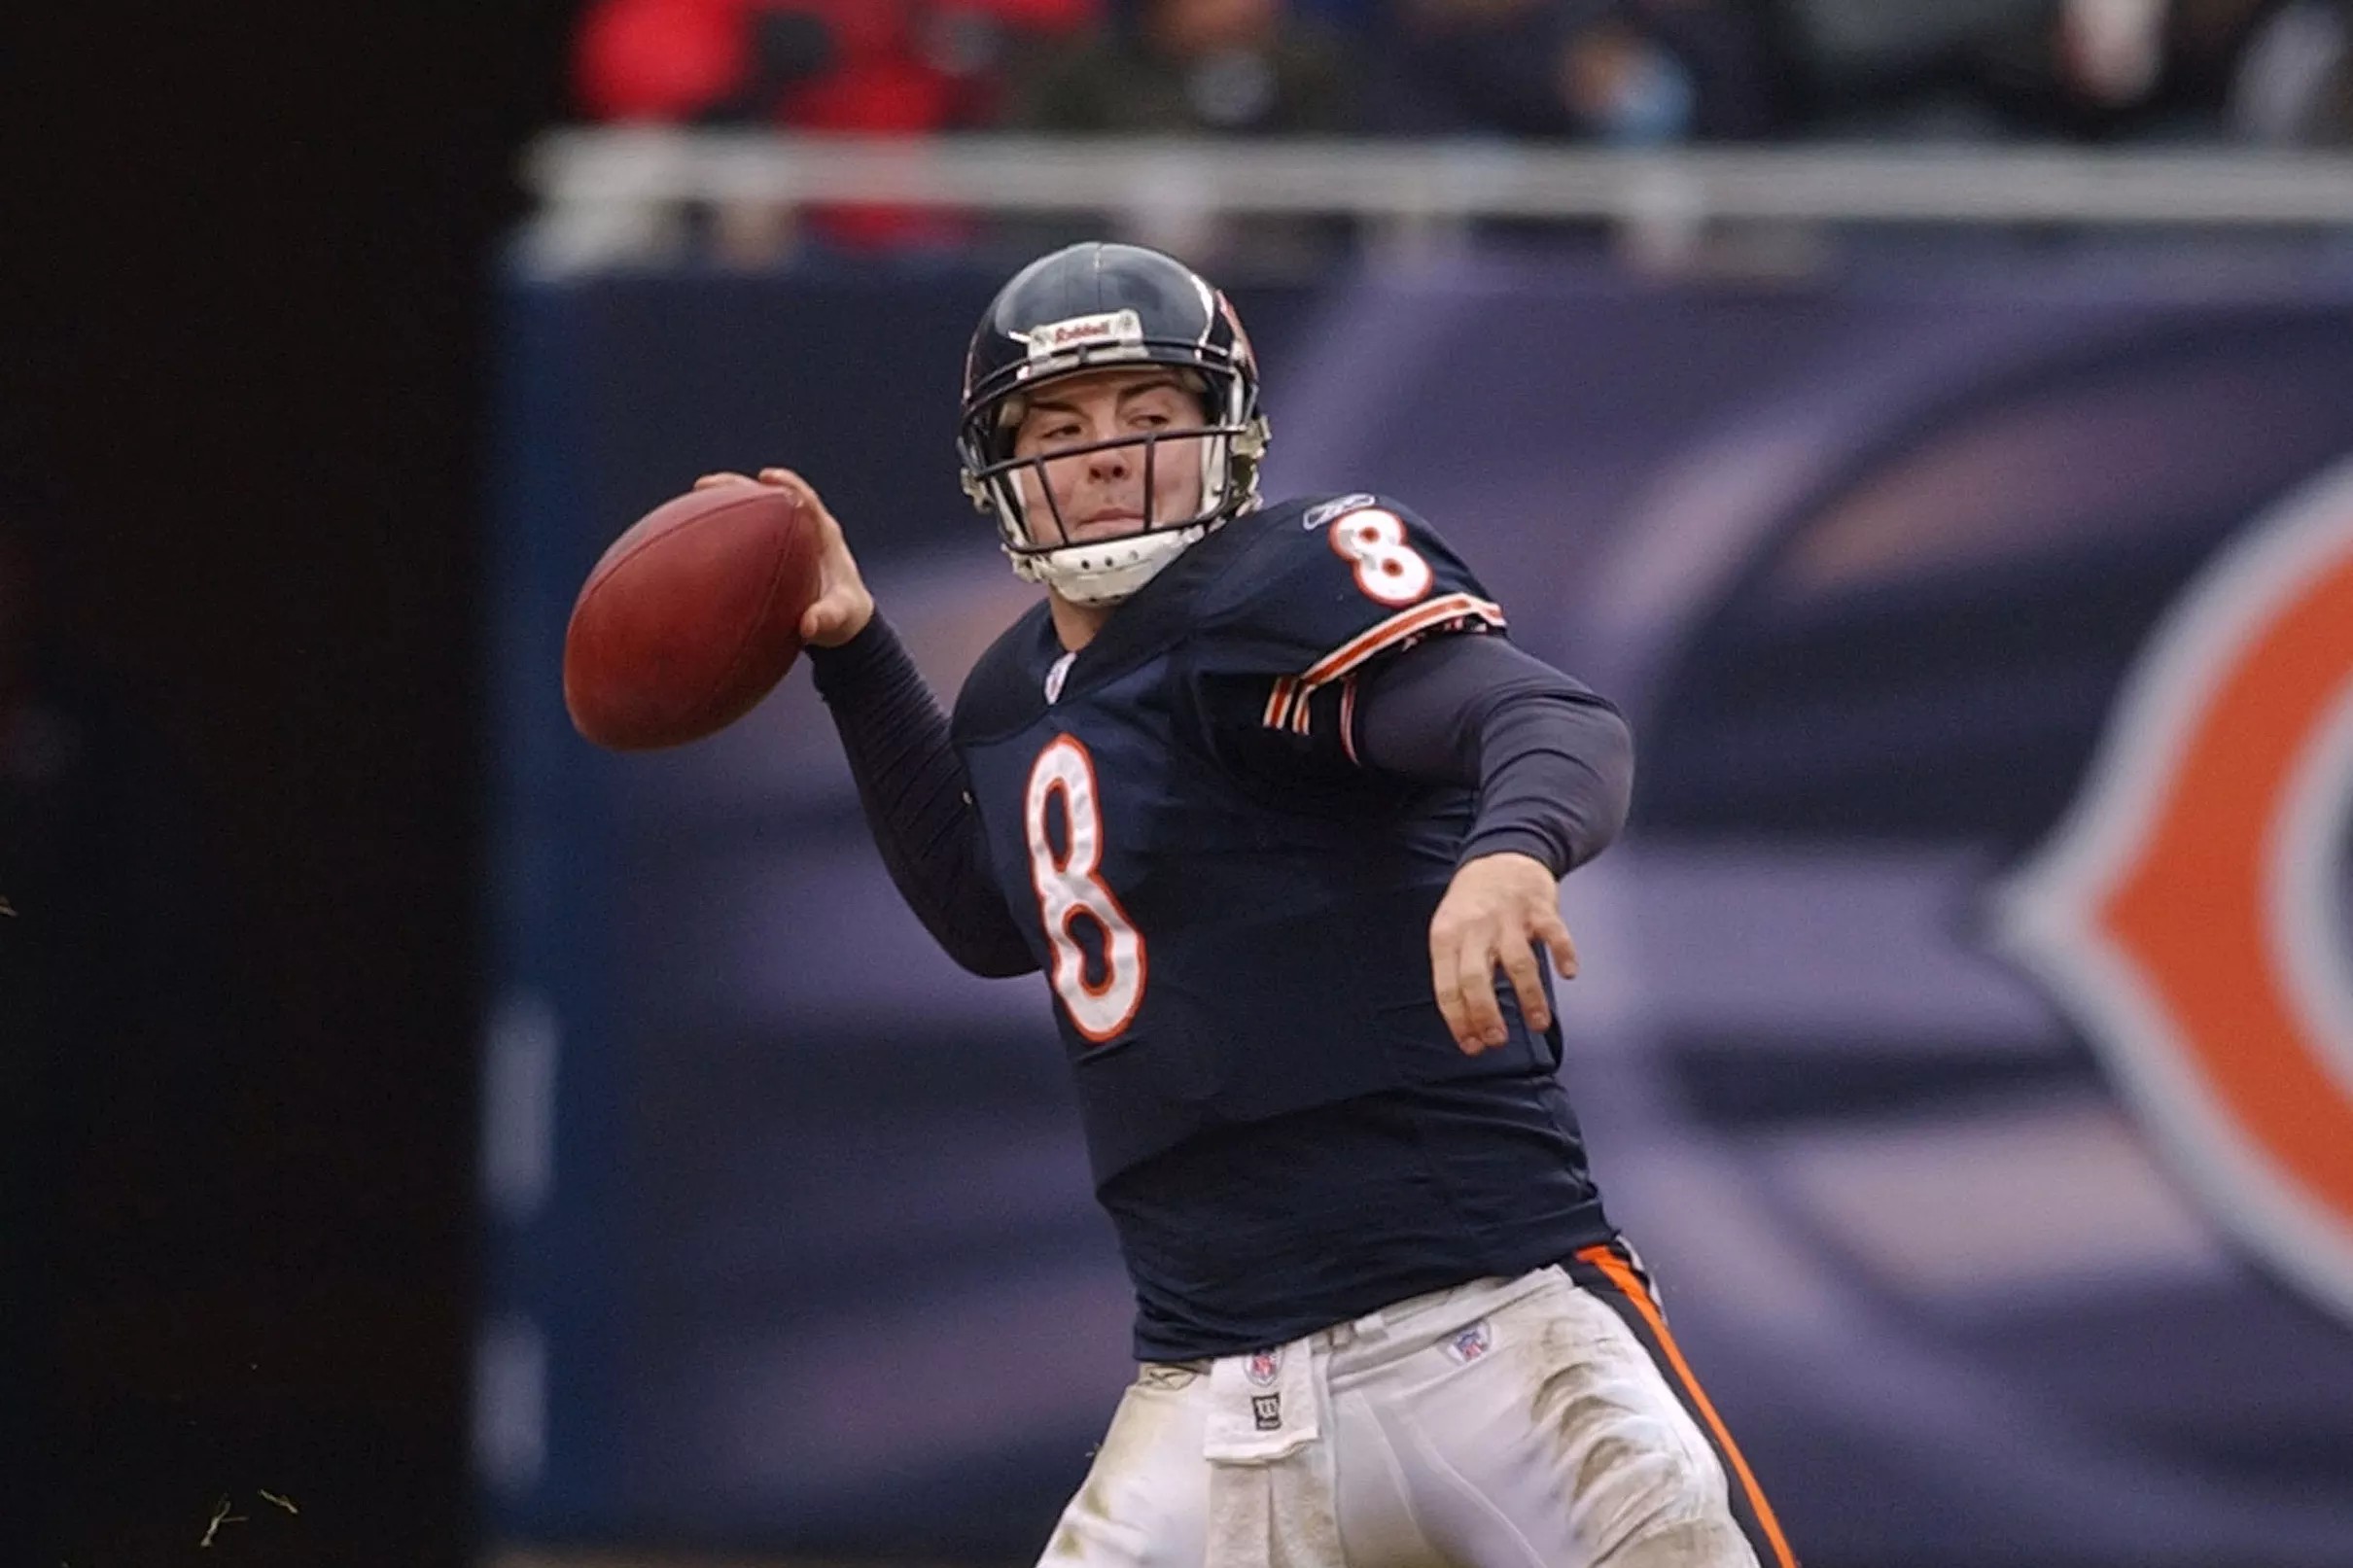 The complete history of Bears quarterbacks who were “The Future”